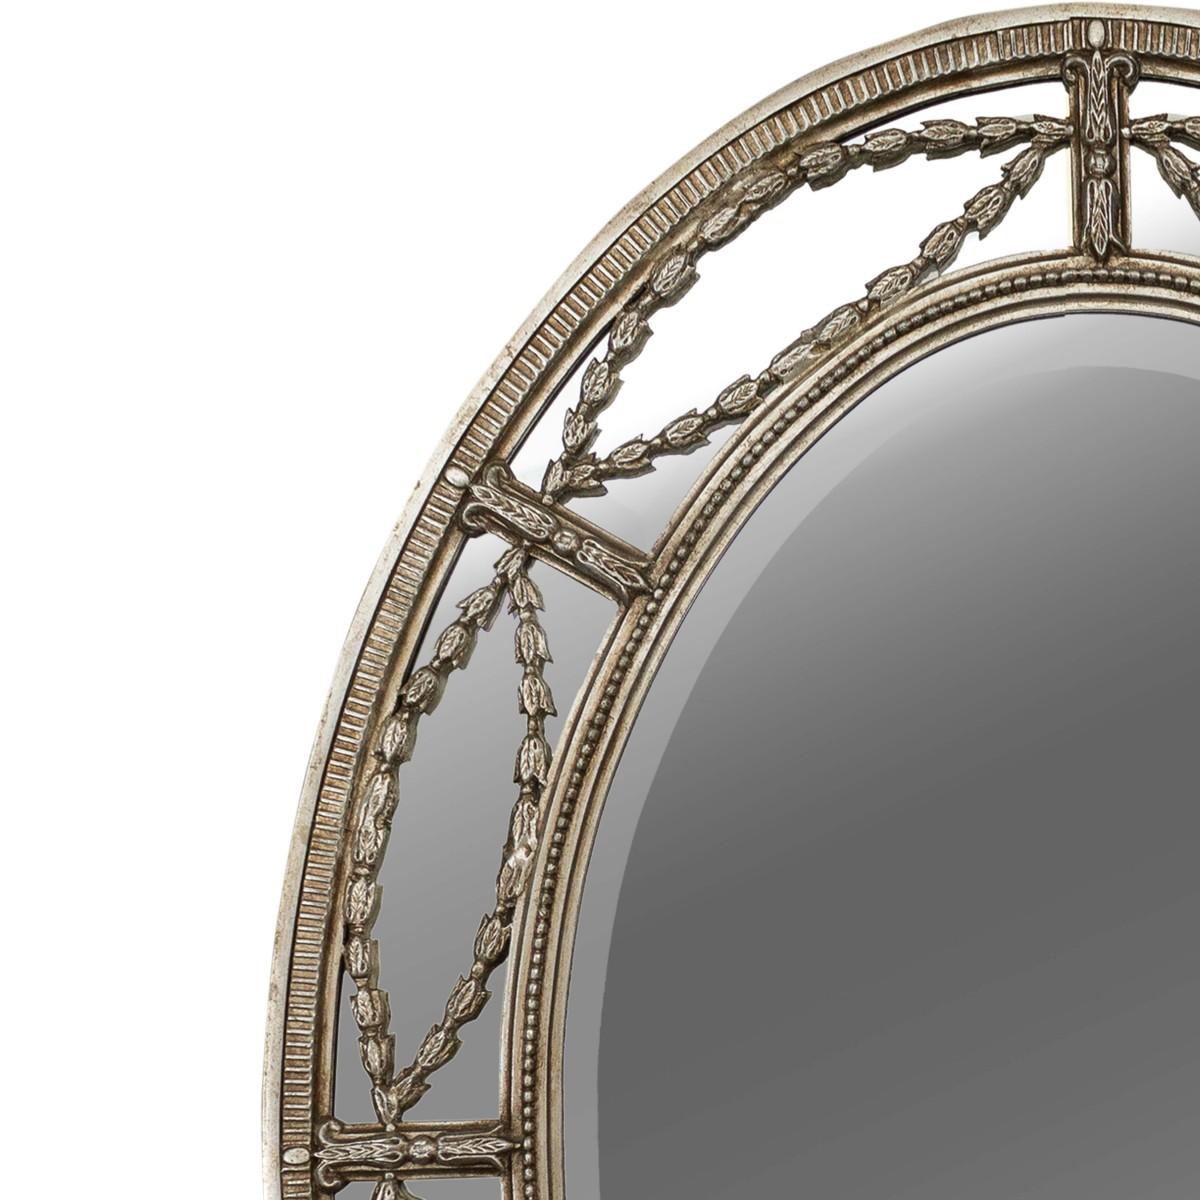 Silver gilt beveled oval mirror made by Agostino Antiques.

Features an oval frame with a garland overlay and beveled mirrors within.
     